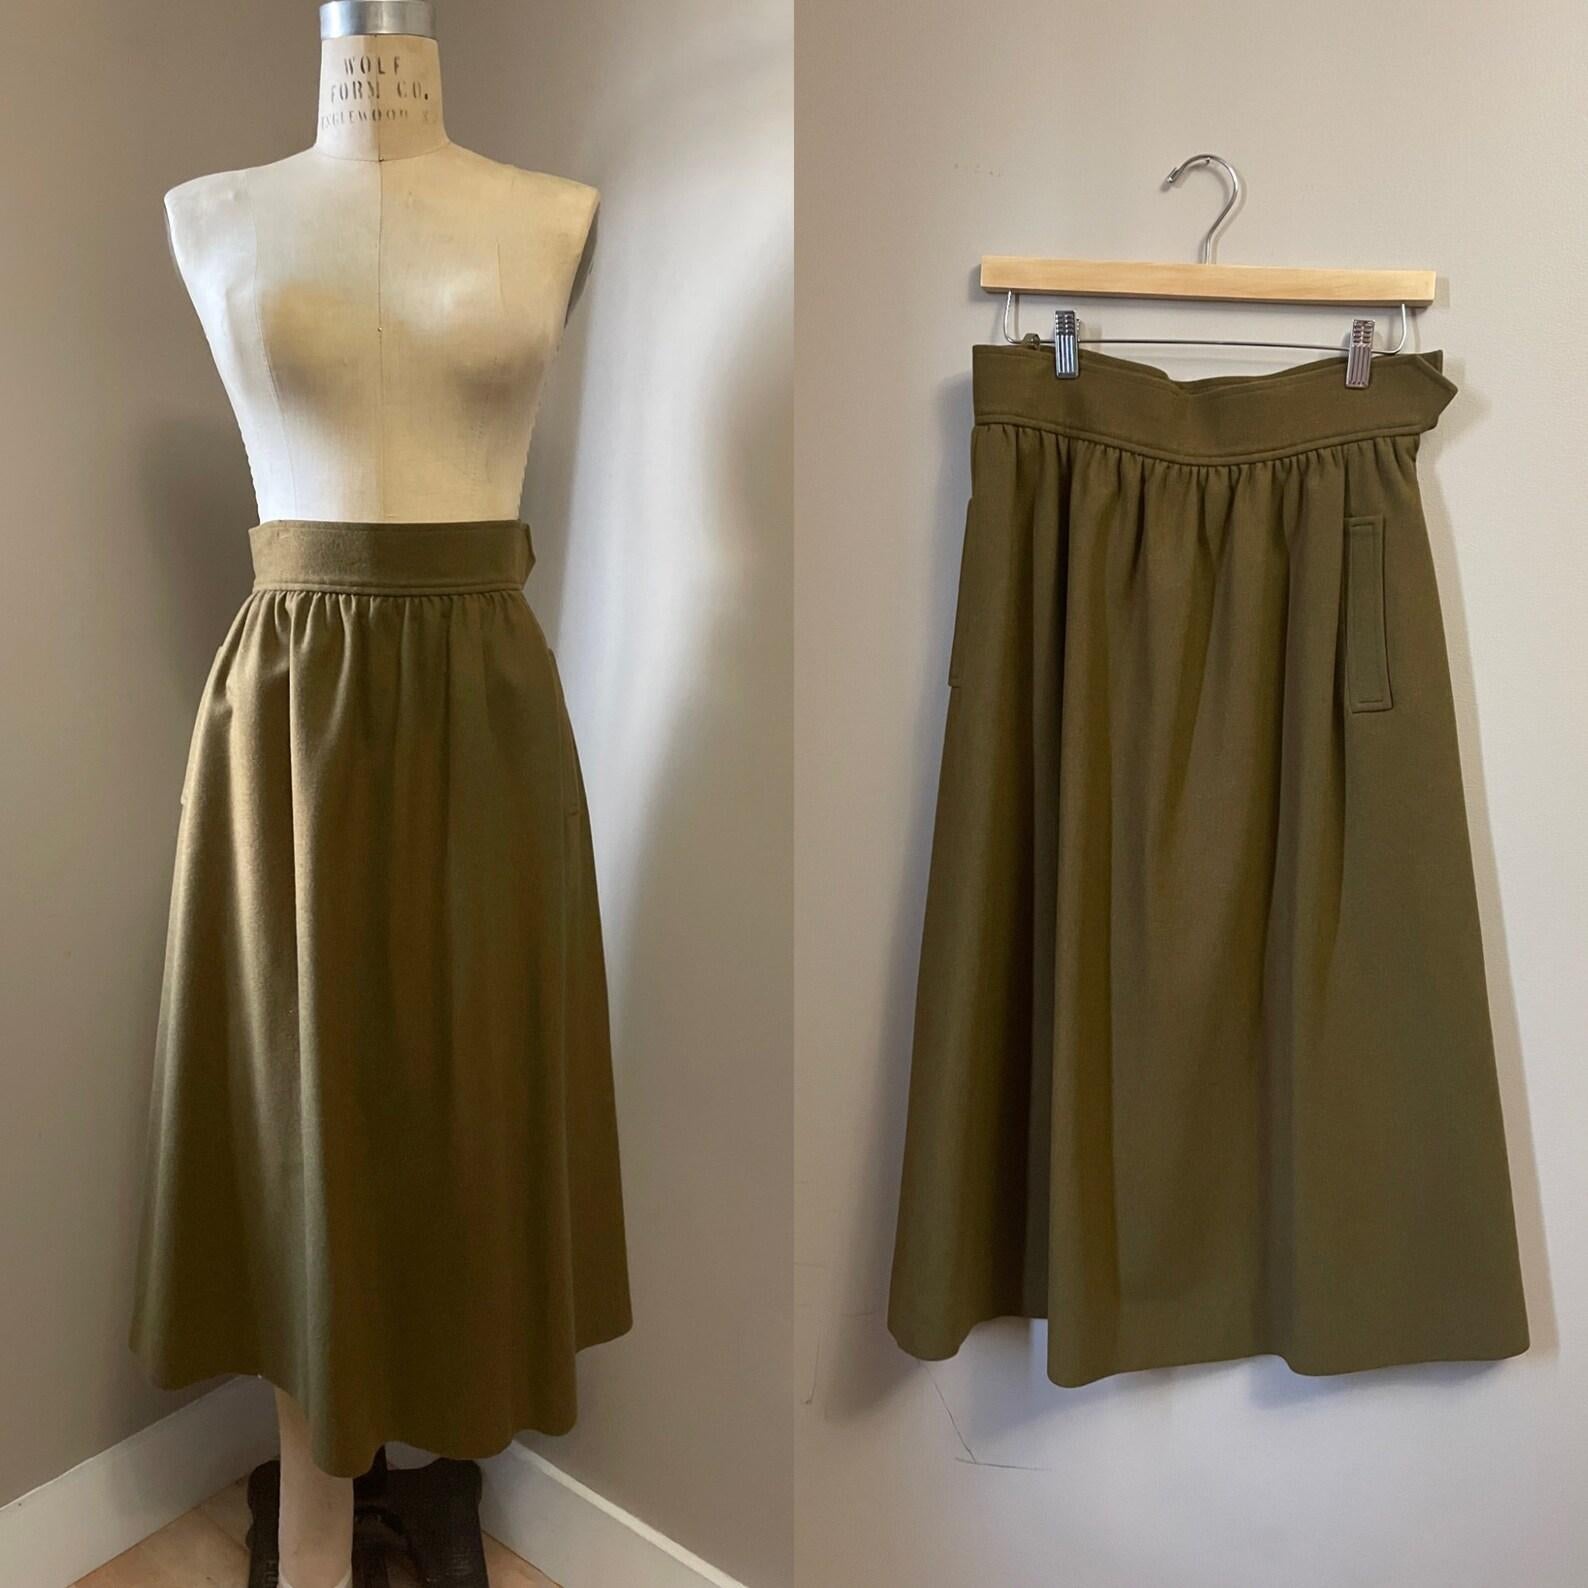 Vintage Yves Saint Laurent wool skirt. high waist. a line silhouette. below knee length. two front pockets. side zip closure with hidden hook & eye. skirt is lined.

✩ This classic skirt is an amazing find! 

Circa 1980s
Yves Saint Laurent
Made in